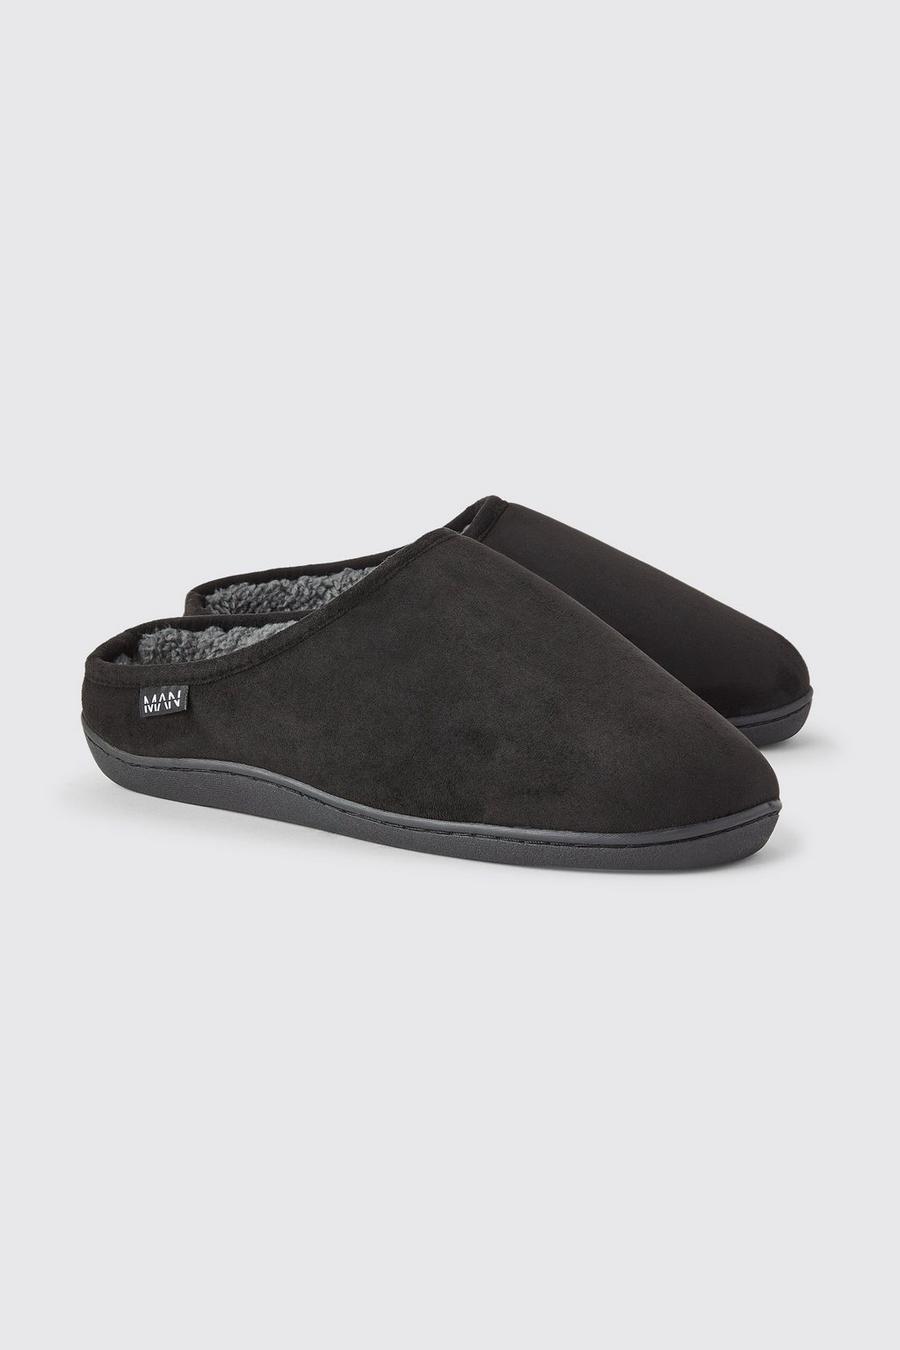 Black Man Faux Suede Slippers